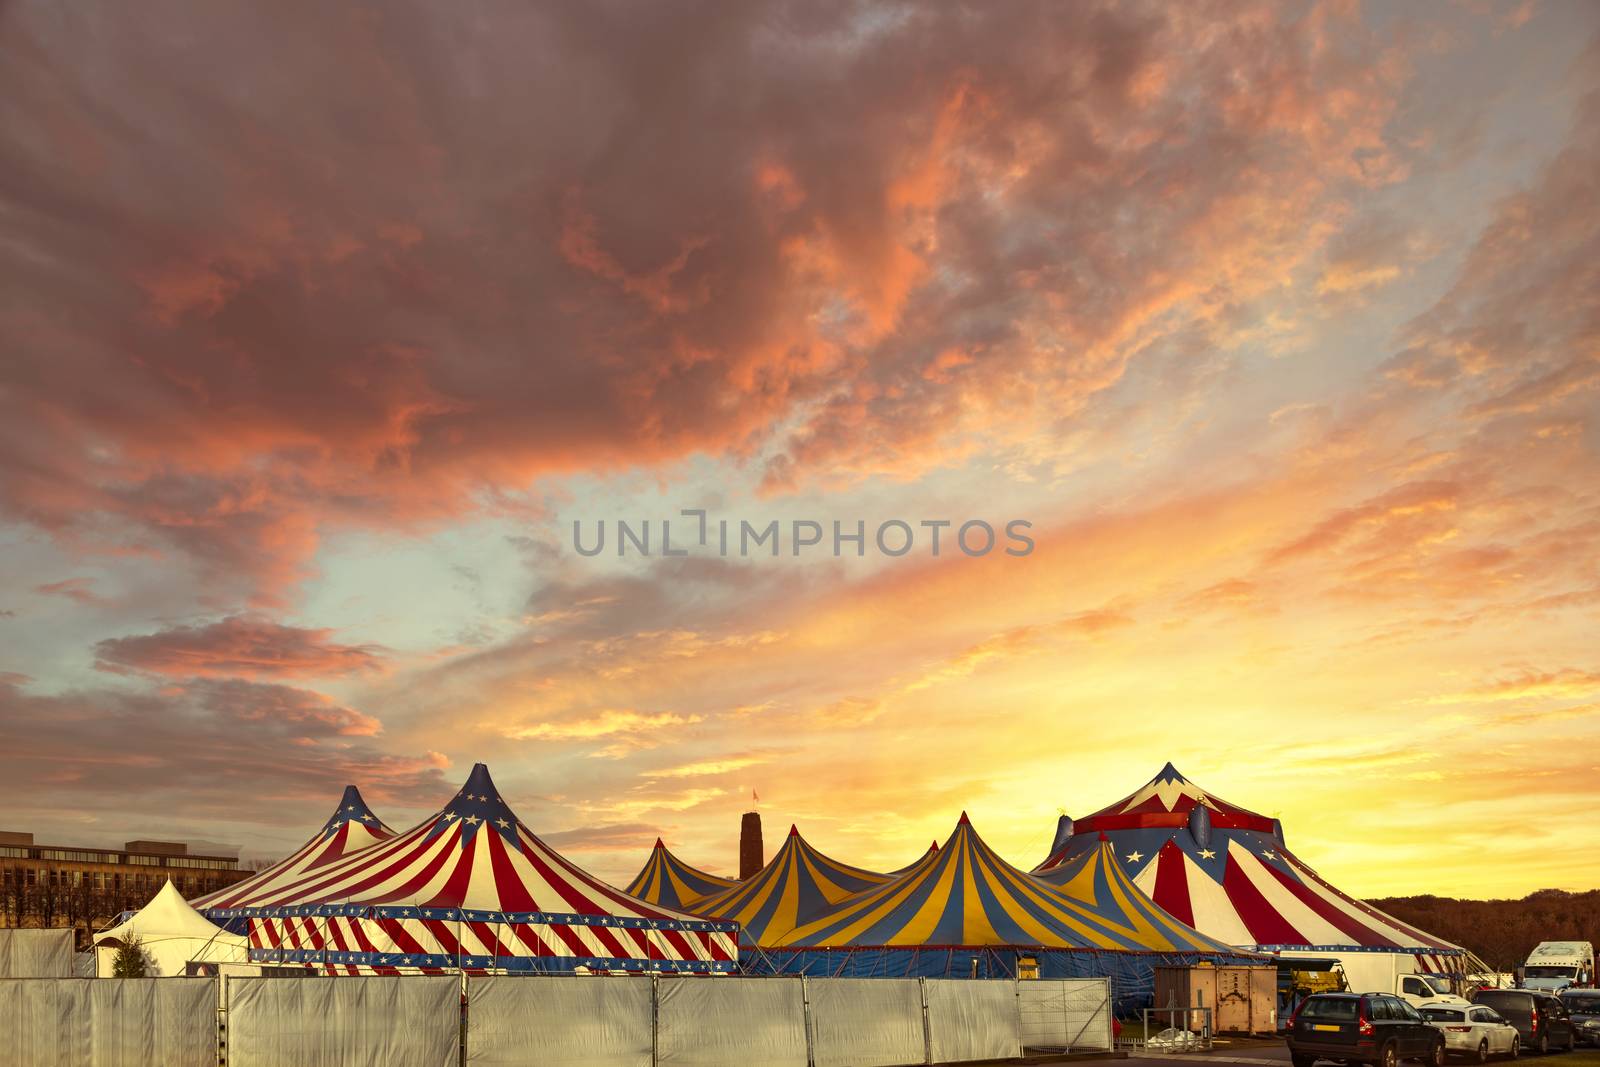 Red and white circus tents topped with bleu starred cover against a sunny blue sky with clouds by ankorlight